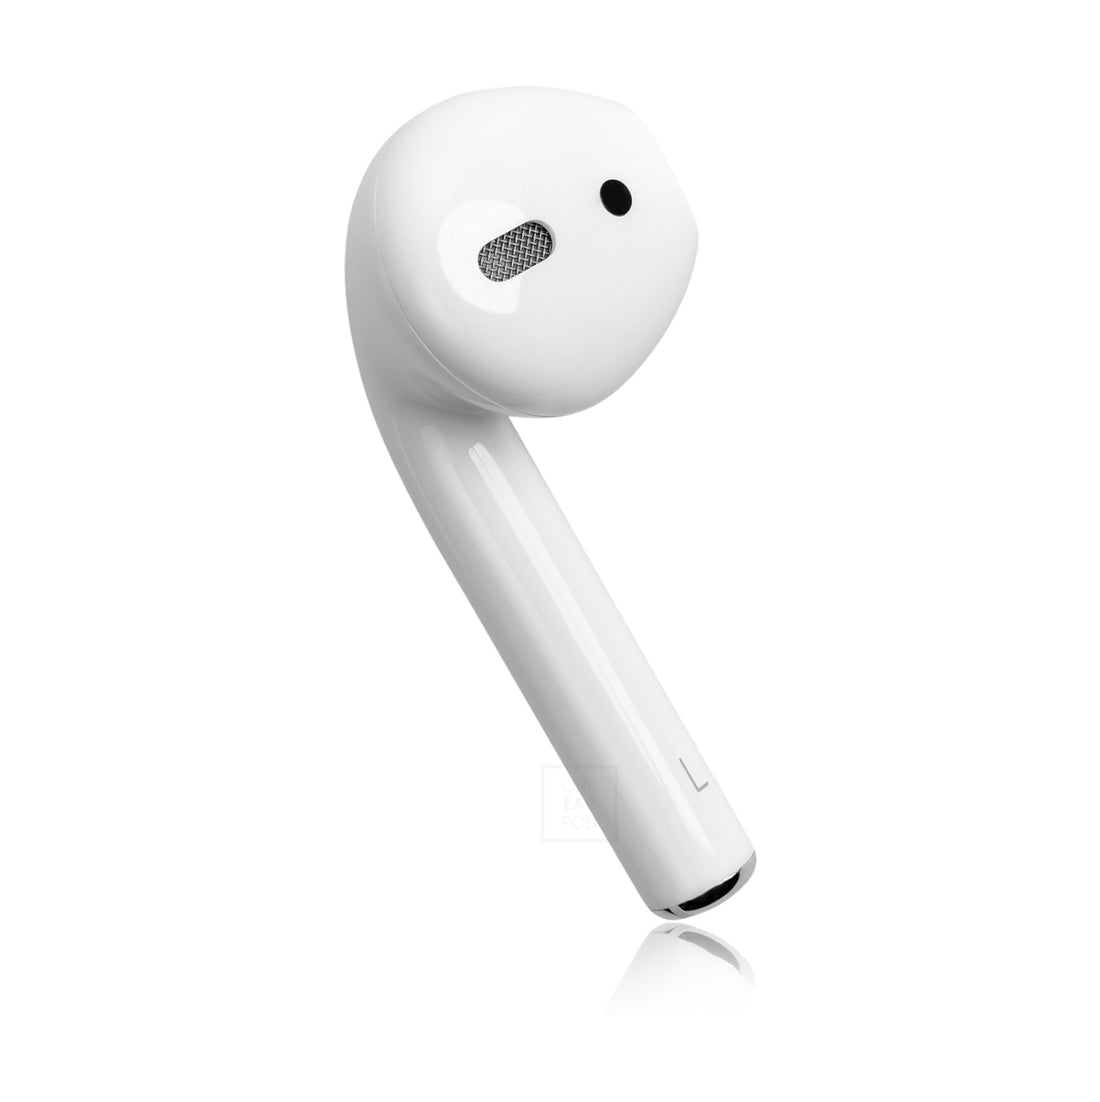 Apple Airpods 2nd generation left AirPod alone left ear)